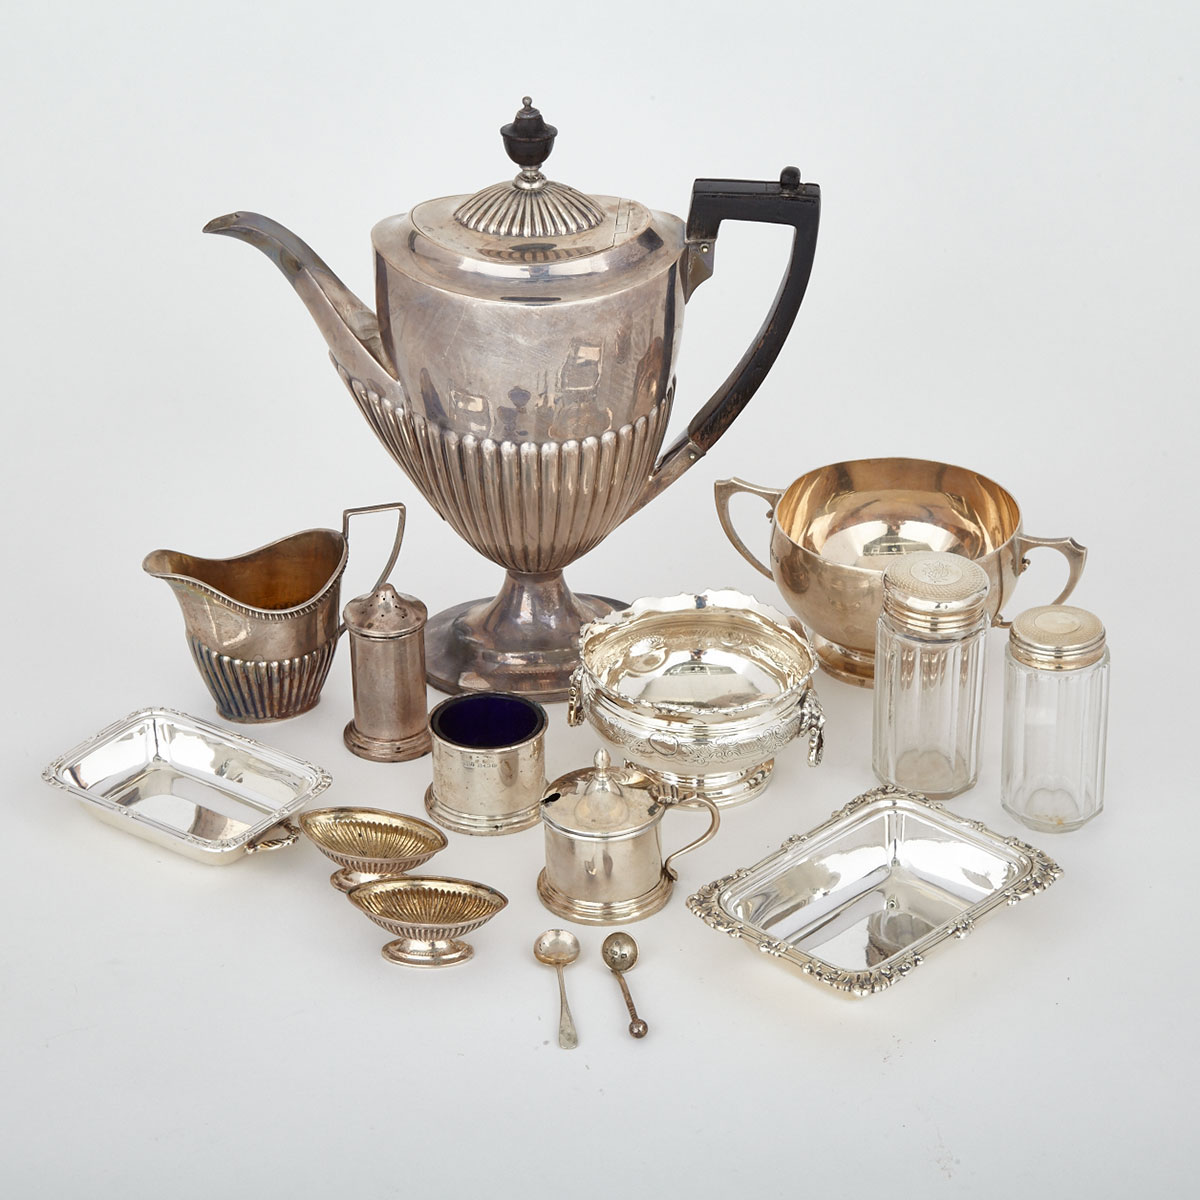 Grouped Lot of Victorian and Later English Silver, London, Birmingham, Sheffield and Chester, c.1885-1937